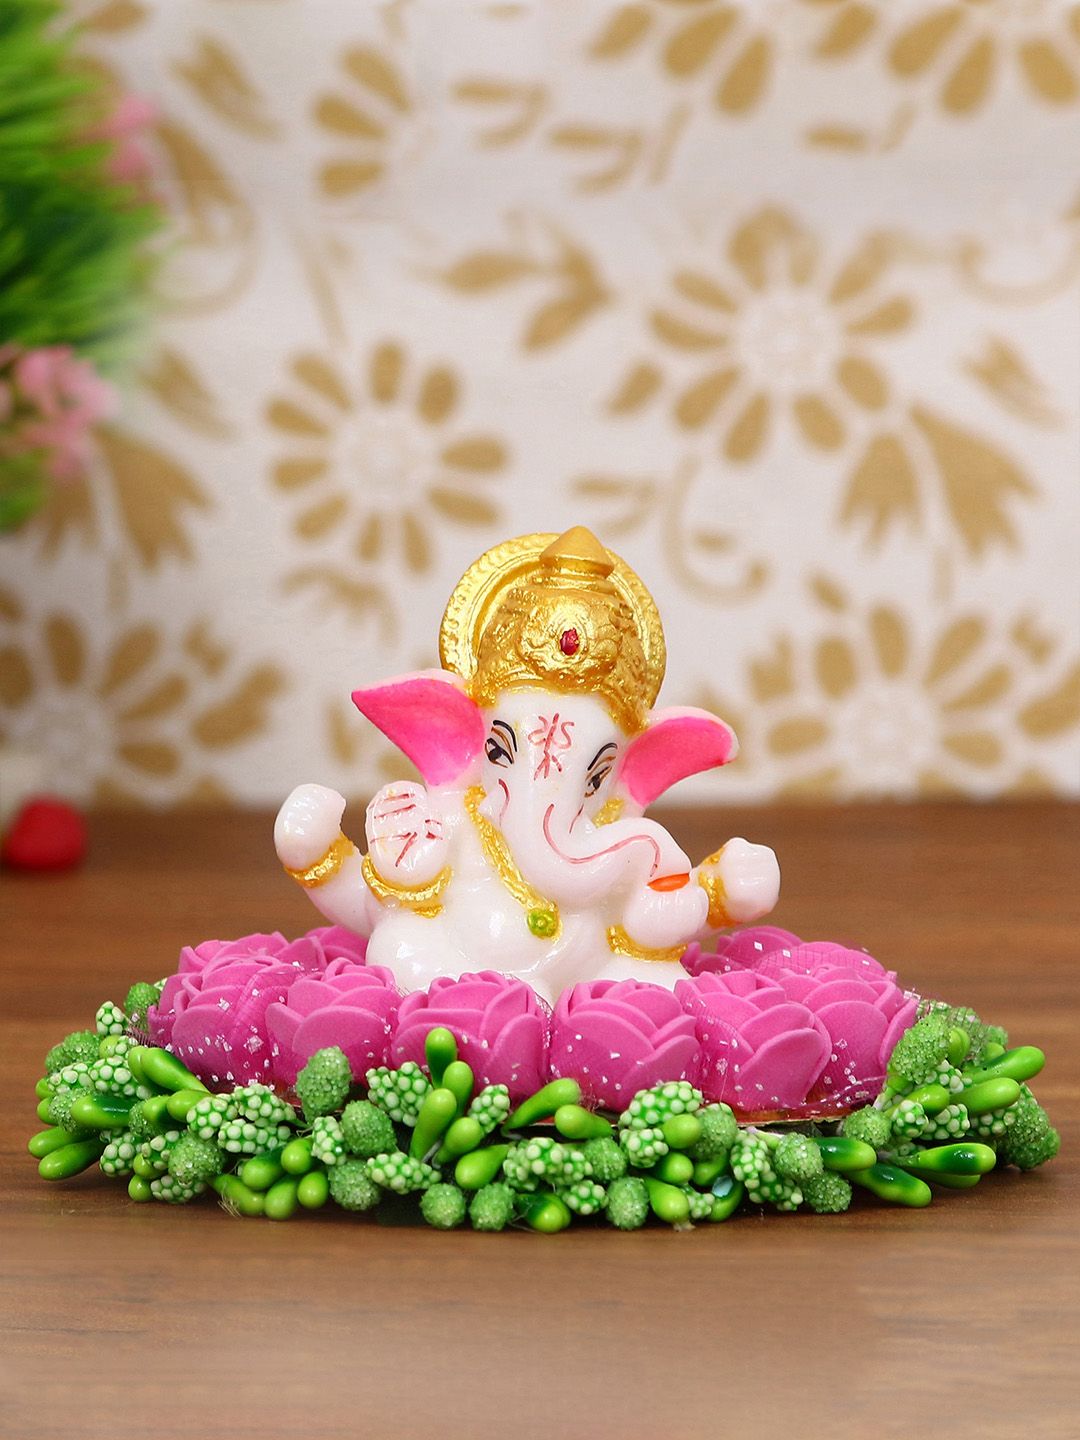 eCraftIndia Pink & White Lord Ganesha Idol On Handcrafted Plate With Flowers Showpiece Price in India